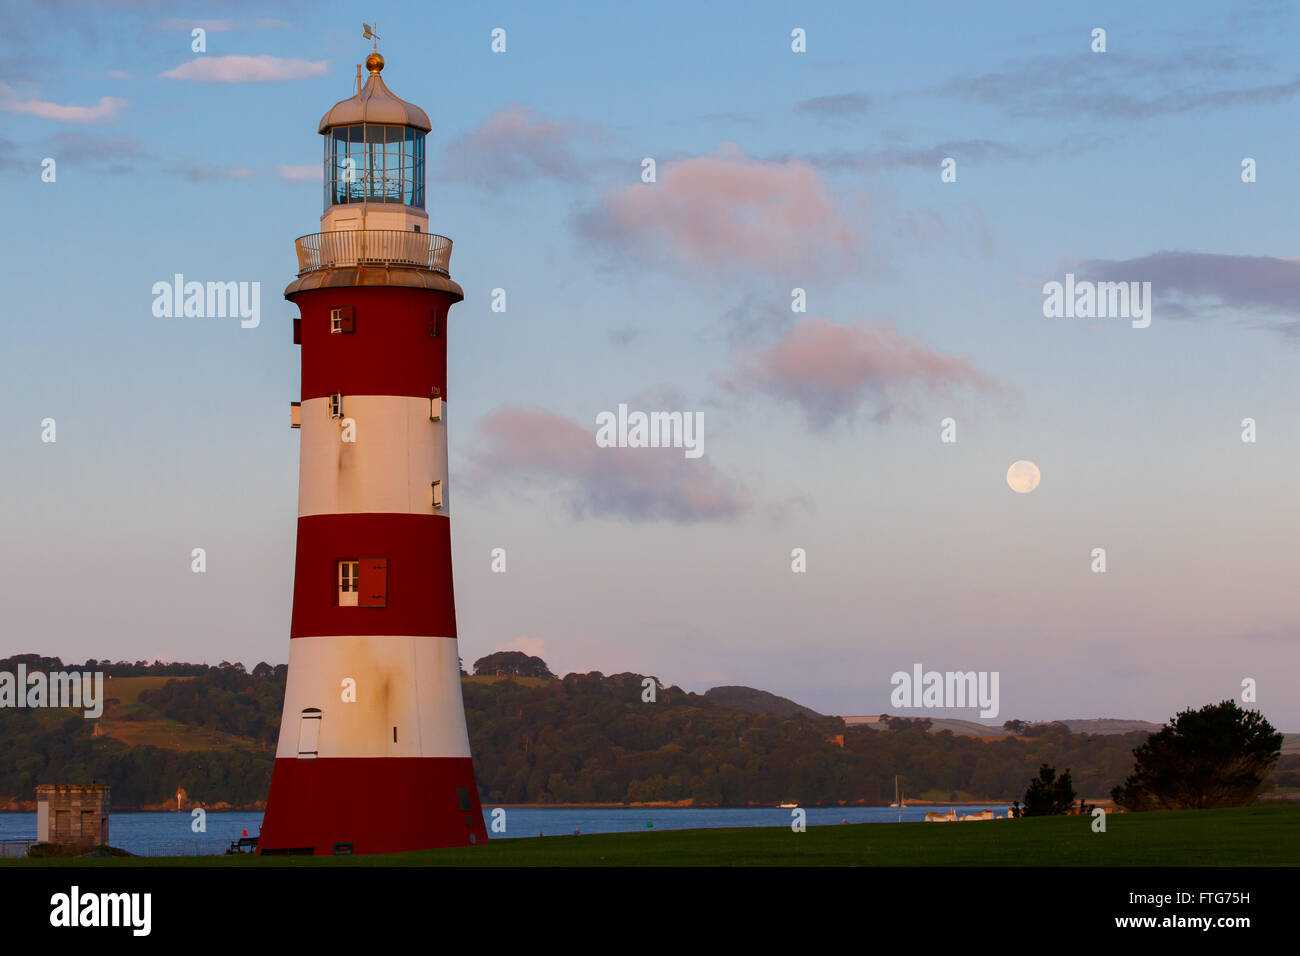 Smeaton's Tower on Plymouth Hoe at sunset. Plymouth, Devon, UK.  The iconic lighthouse previously stood on Eddystone Rock. Stock Photo